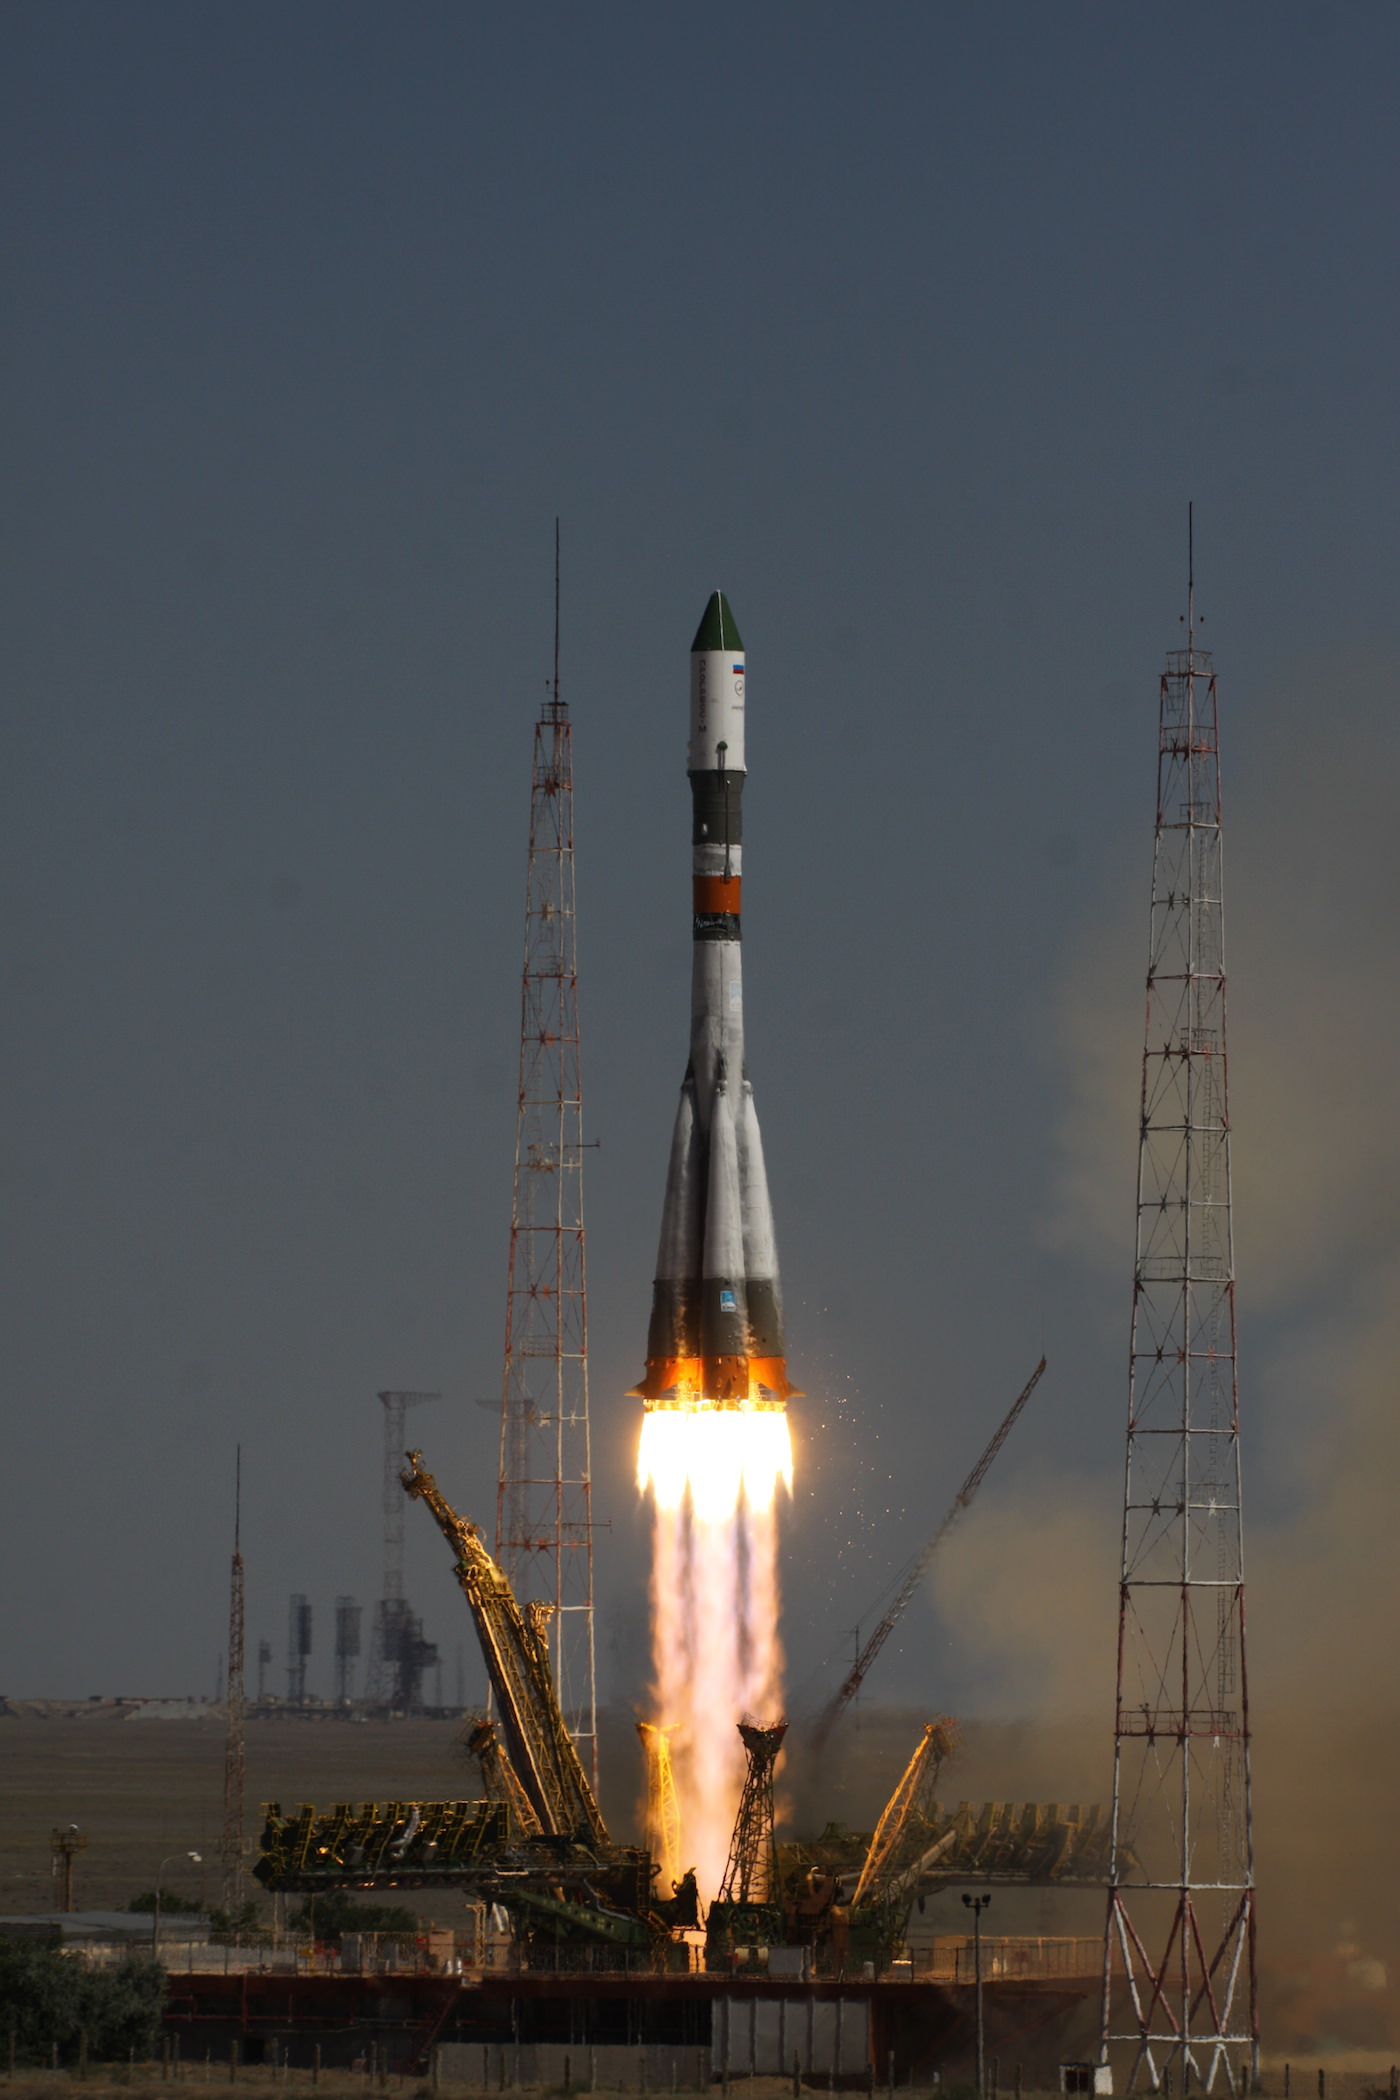 Blastoff of the Russian Progress 60 resupply ship to the ISS from the Baikonur Cosmodrome on July 3, 2015. Credit: Roscosmos